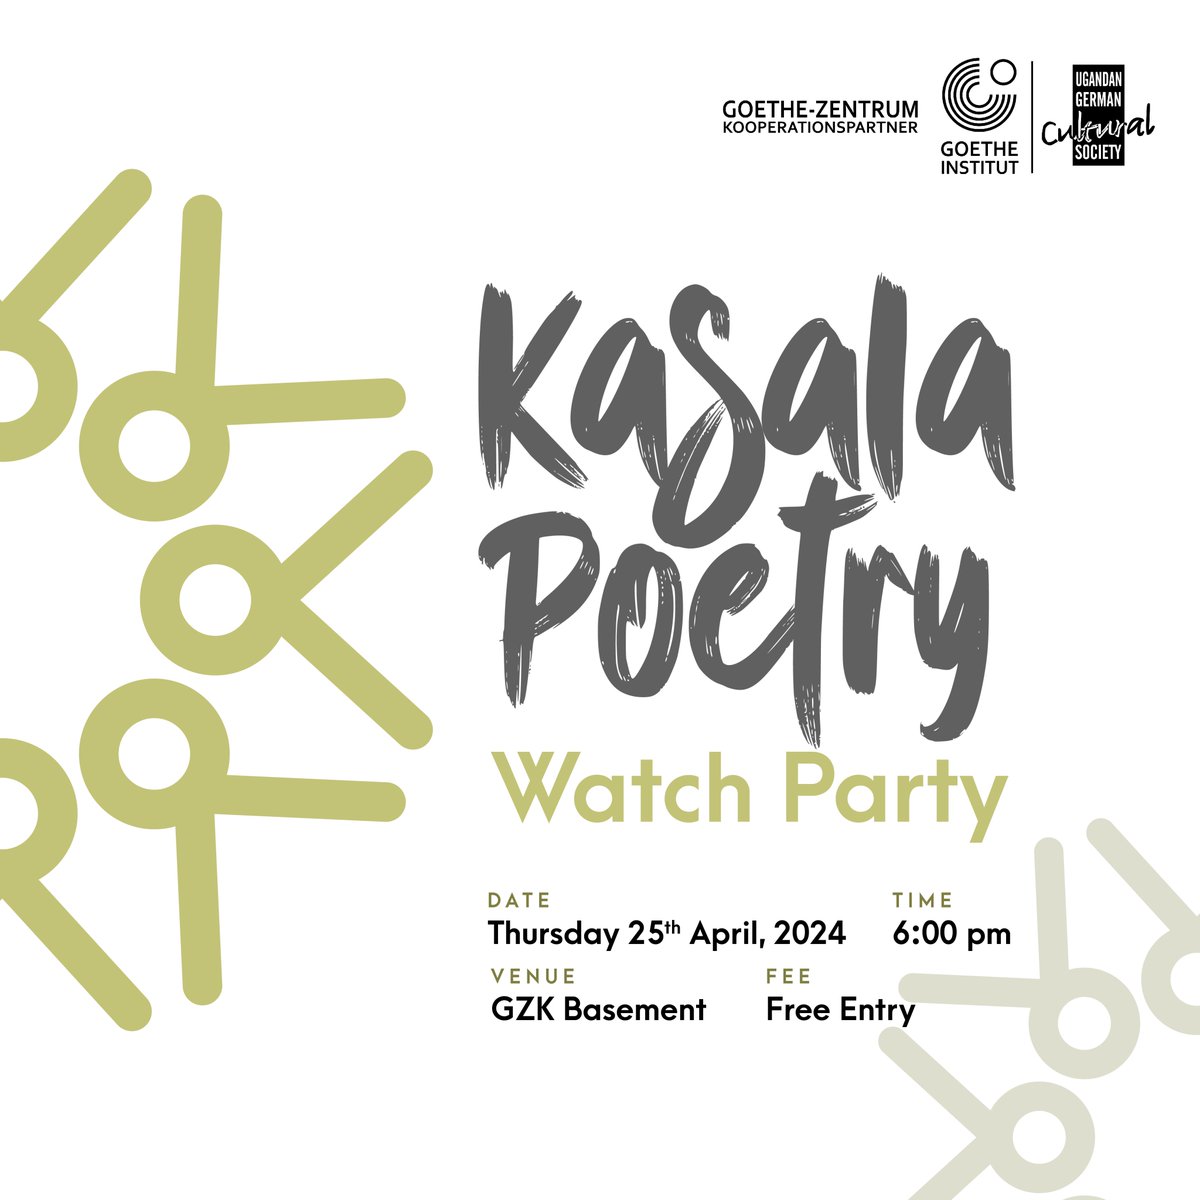 🎙️ Dive into the world of Kasala poetry with us! Join Elijah Bwojji and Loic Ekinga on April 25th, 6:00 pm, as we celebrate the unique artistry of seven poets. It's a twist on spoken word you won't want to miss! #KasalaPoetry #SpokenWord #Artistry